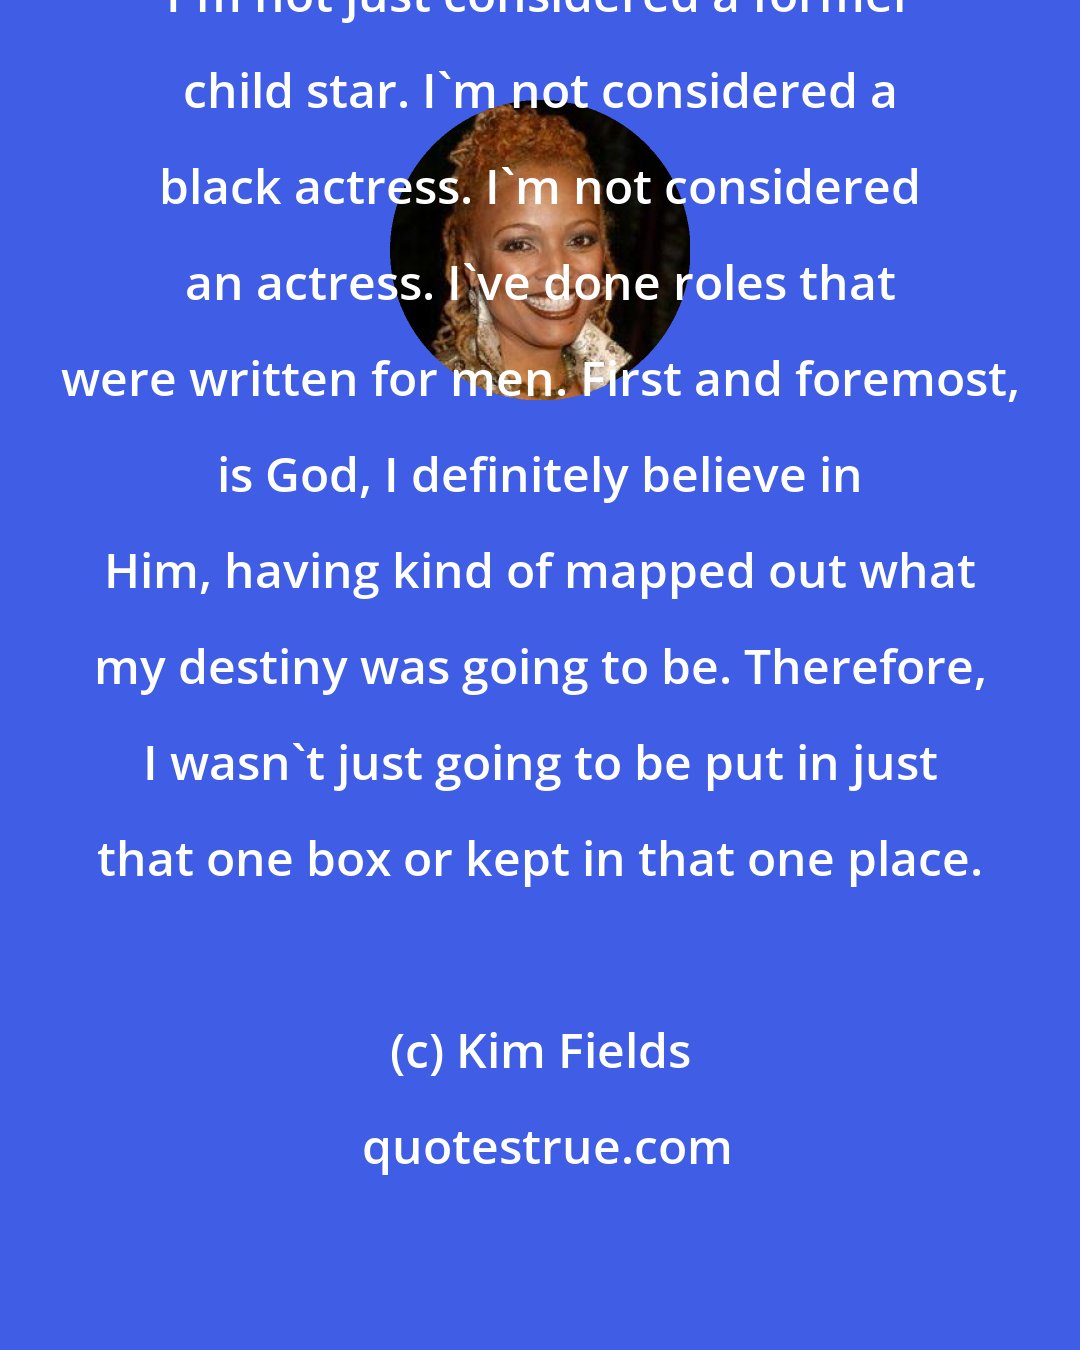 Kim Fields: I'm not just considered a former child star. I'm not considered a black actress. I'm not considered an actress. I've done roles that were written for men. First and foremost, is God, I definitely believe in Him, having kind of mapped out what my destiny was going to be. Therefore, I wasn't just going to be put in just that one box or kept in that one place.